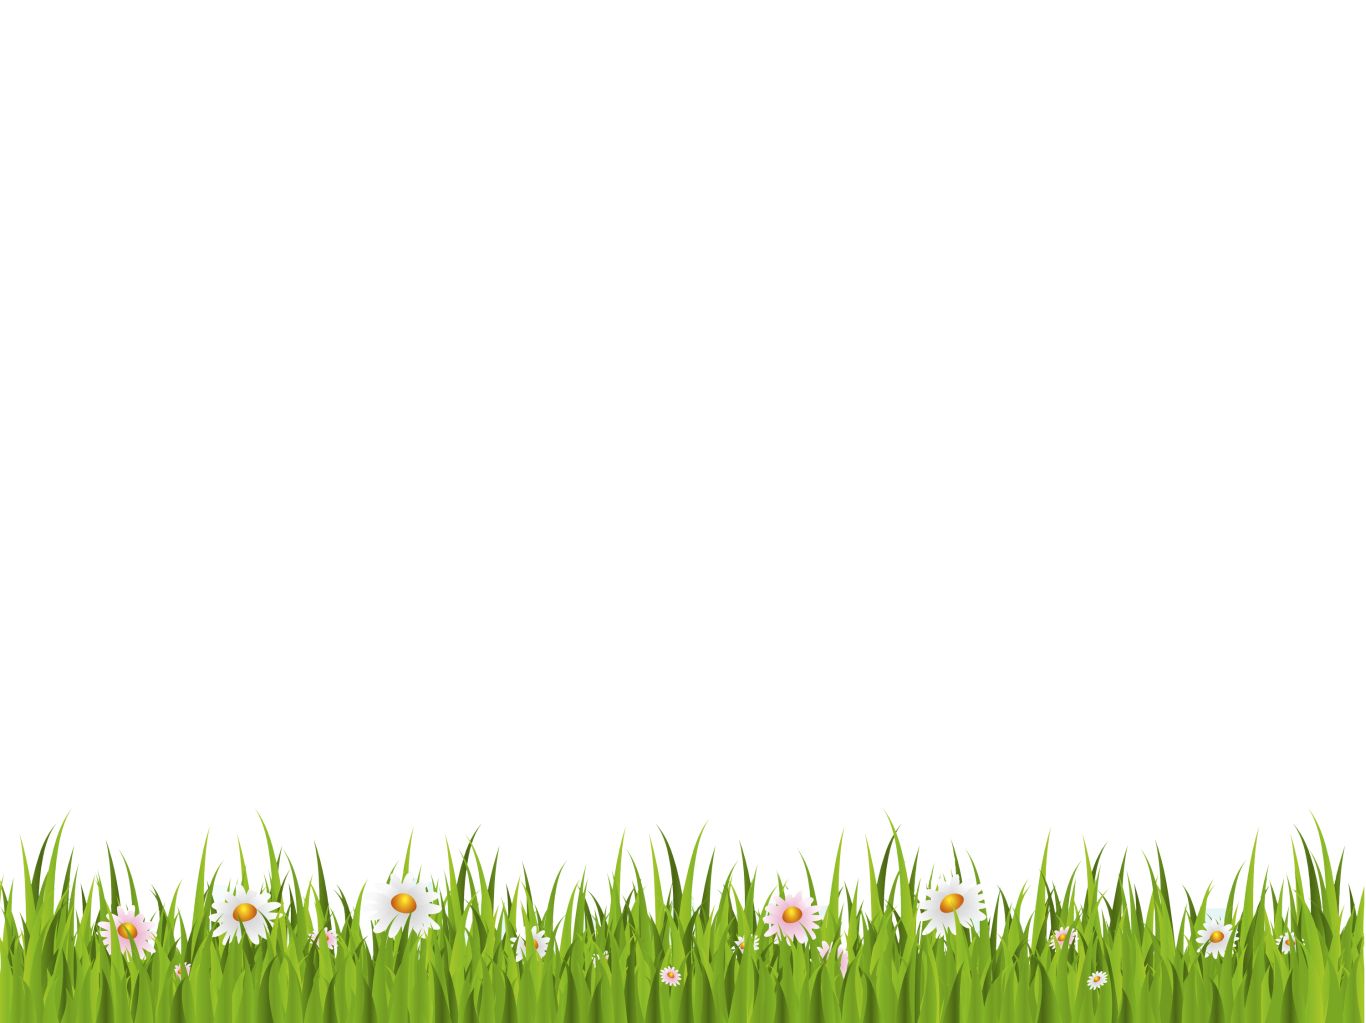 grass png image, green picture     图片编号:397